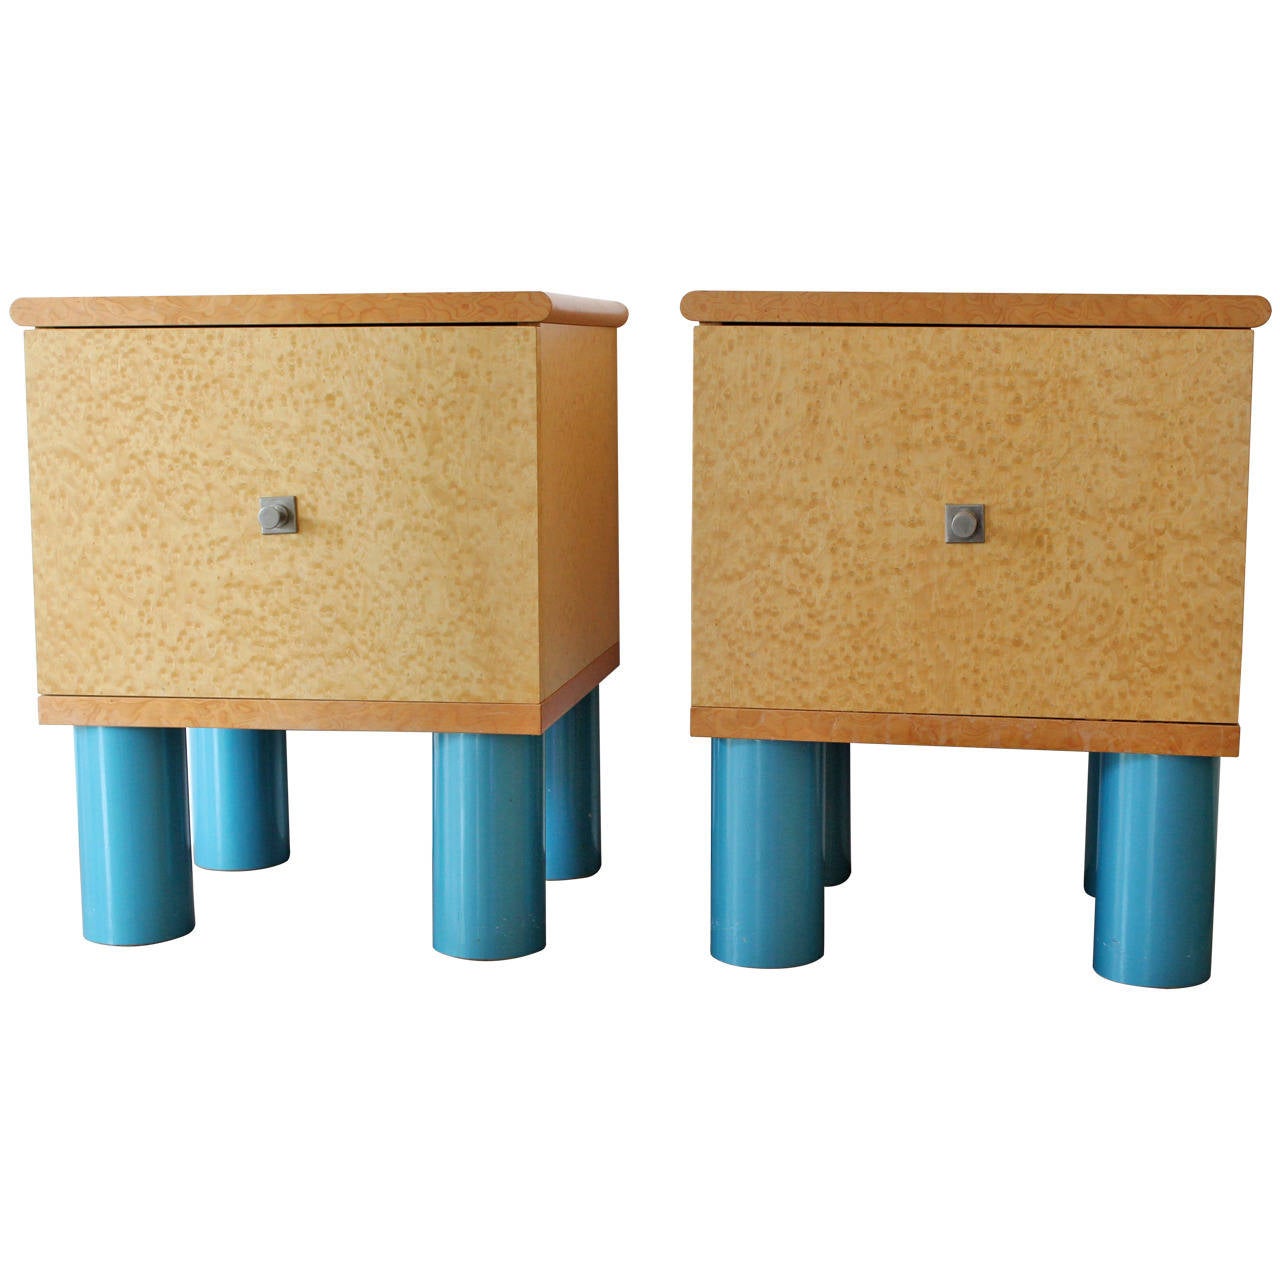 Rare Memphis end tables by Ettore Sottsass, Marco Zanini and Franz Leitner.
For the Austrian furniture manufacturer Leitner,
circa 1985.